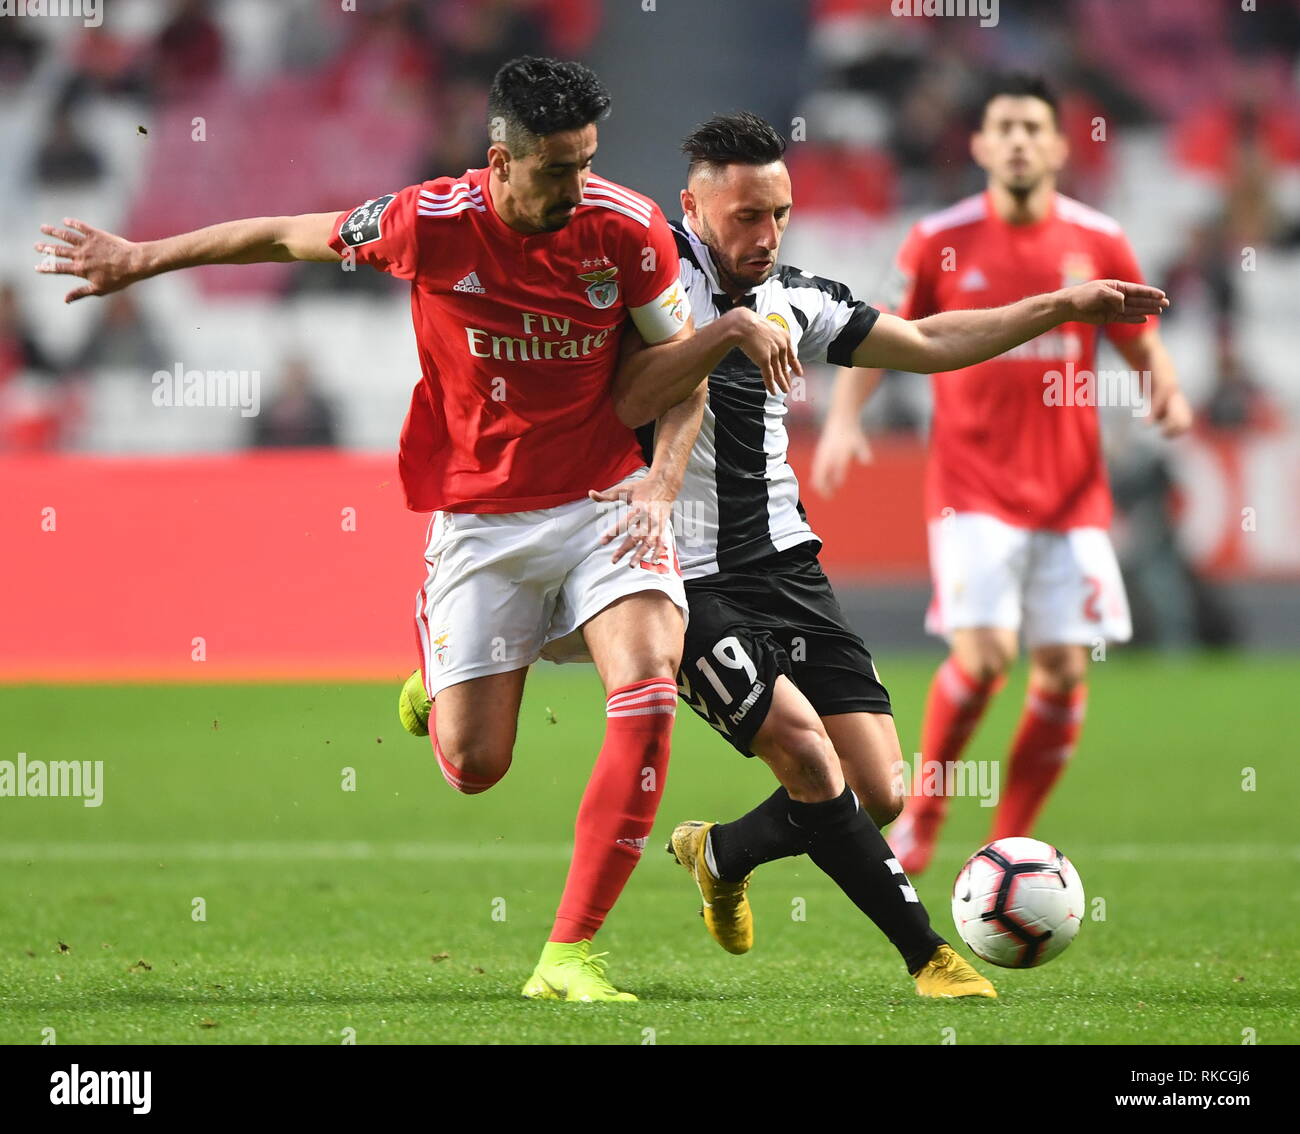 Lisbon, Portugal. 10th Feb, 2019. Andre Almeida (L) of Benfica vies with  Joao Camacho of Nacional during the Portuguese League soccer match between  SL Benfica and CD Nacional at Luz stadium in